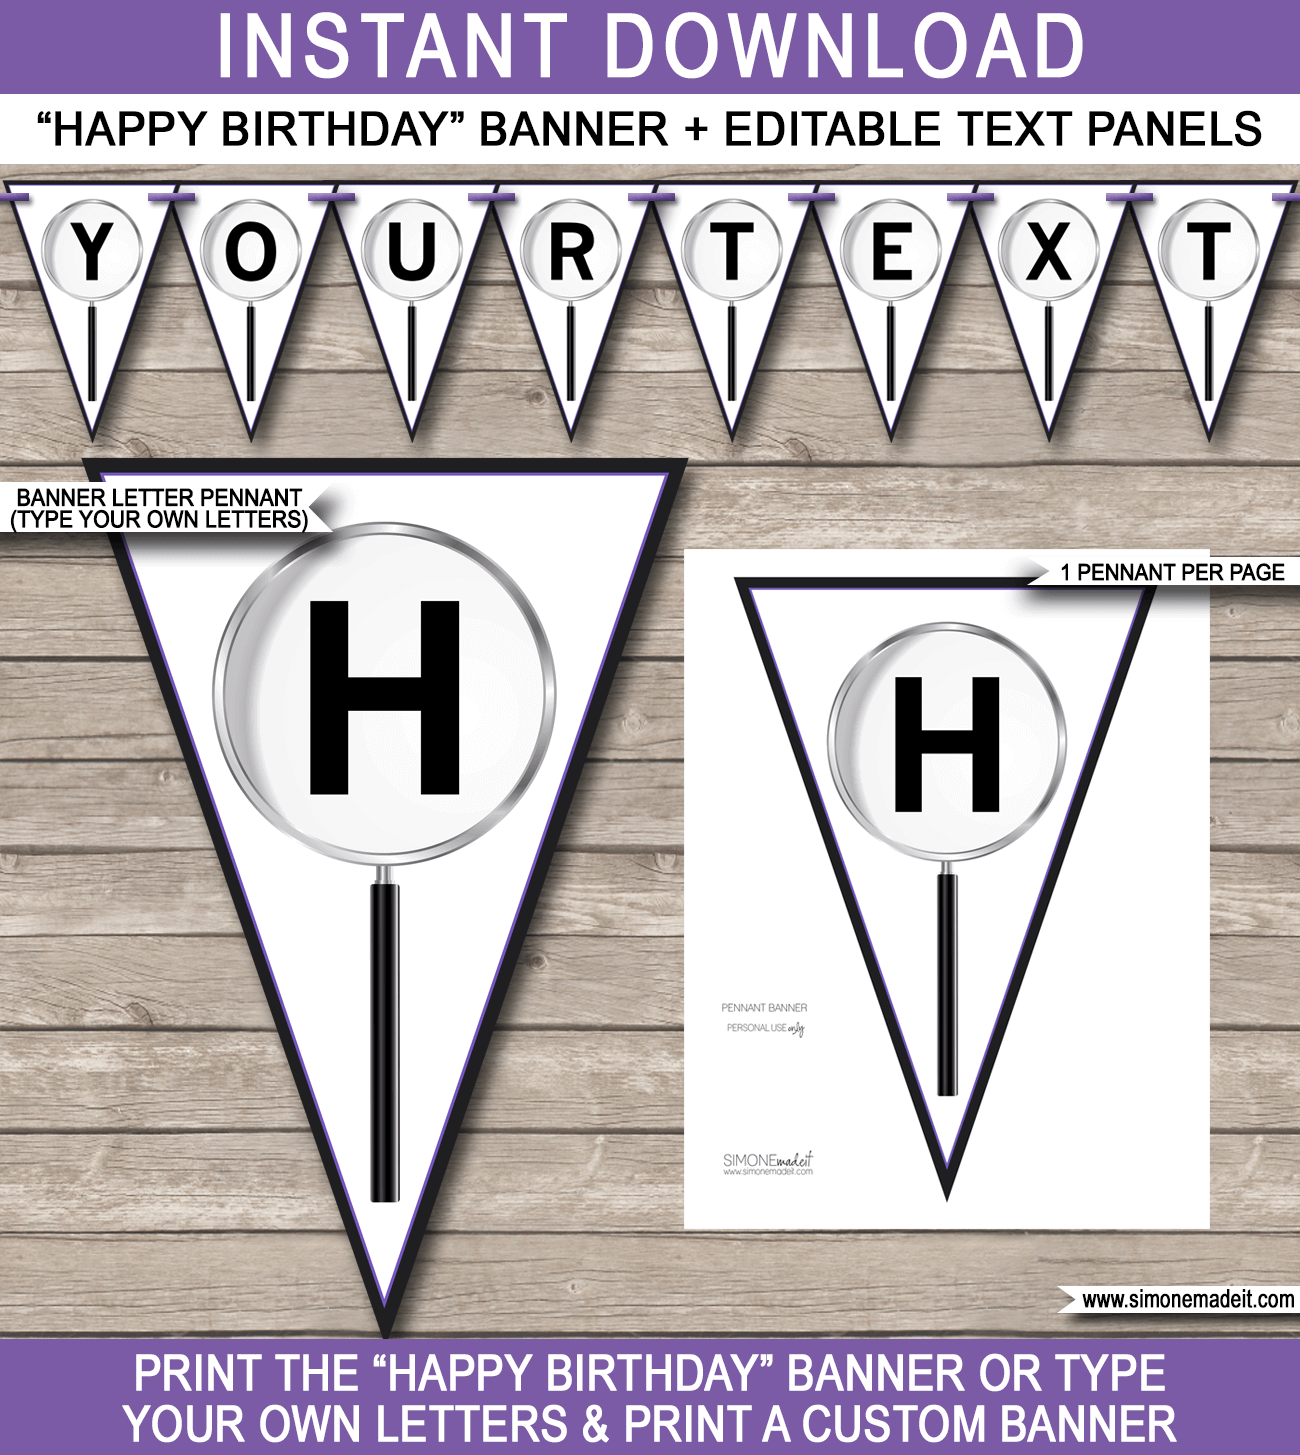 Spy Secret Agent Party Banner Template - Happy Birthday Bunting Pennants - Editable and Printable DIY Template - INSTANT DOWNLOAD $4.50 via simonemadeit.com